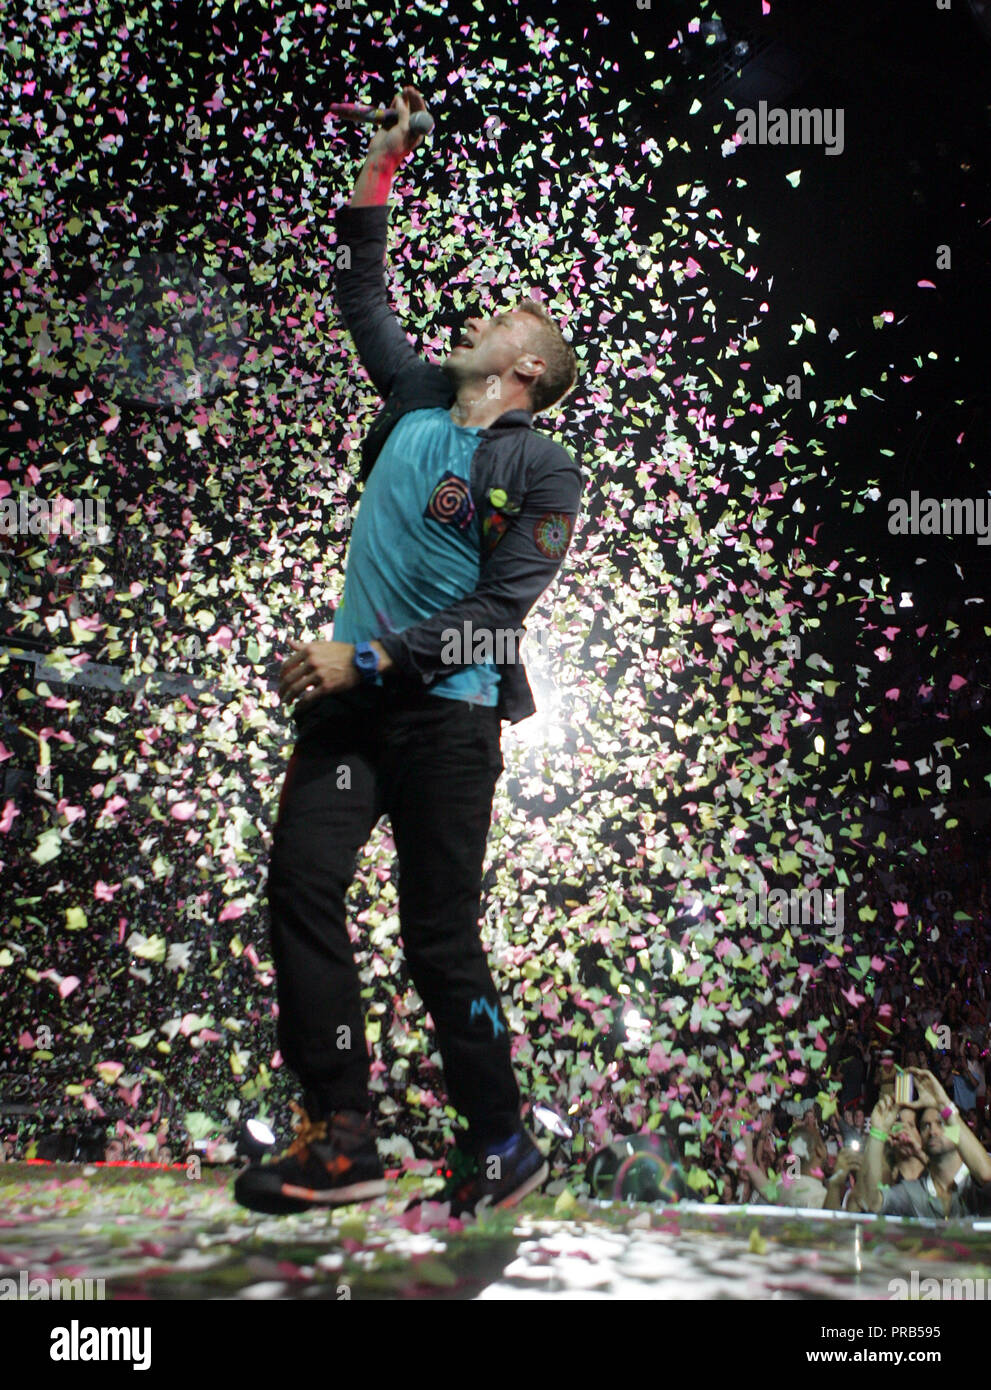 Chris Martin with Coldplay performs in concert on their Mylo Xyloto tour 2012 at the American Airlines Arena in Miami on June 29, 2012. Stock Photo